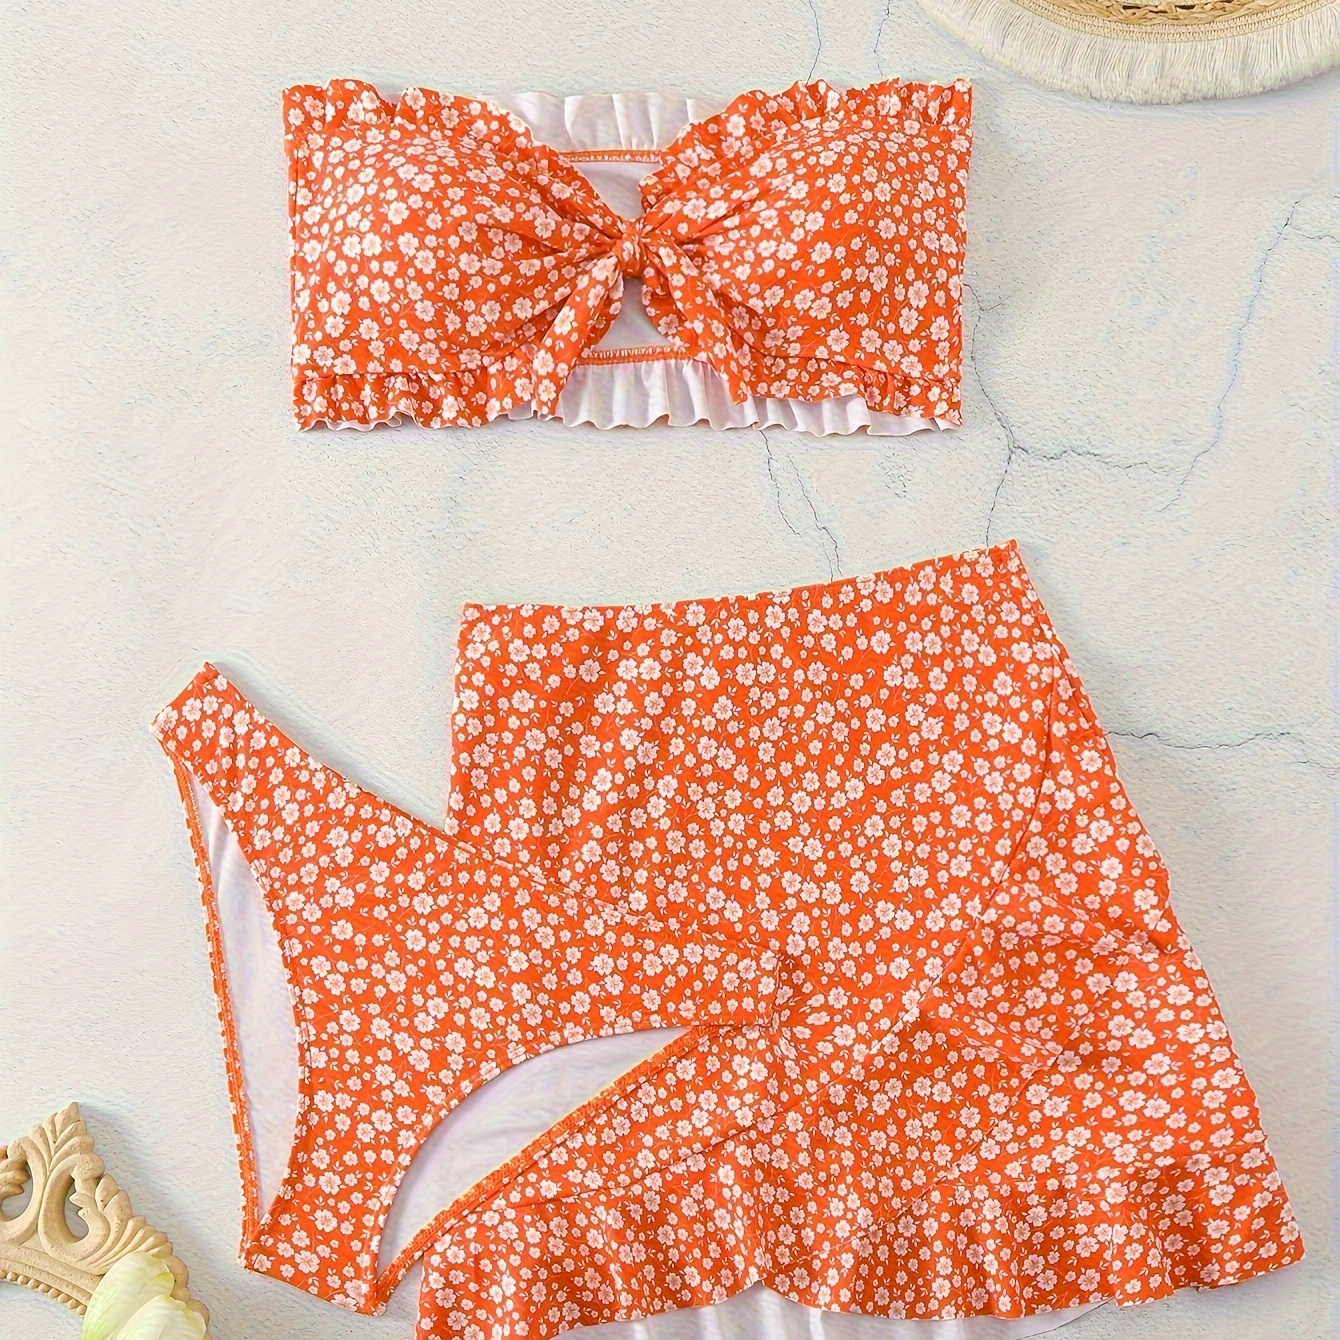 

Tangerine Red Ditsy Floral Print Ruffle 3 Piece Set Bikini & Cover Up Skirt, Bandeau Knot Front Stretchy Swimsuits, Women's Swimwear & Clothing